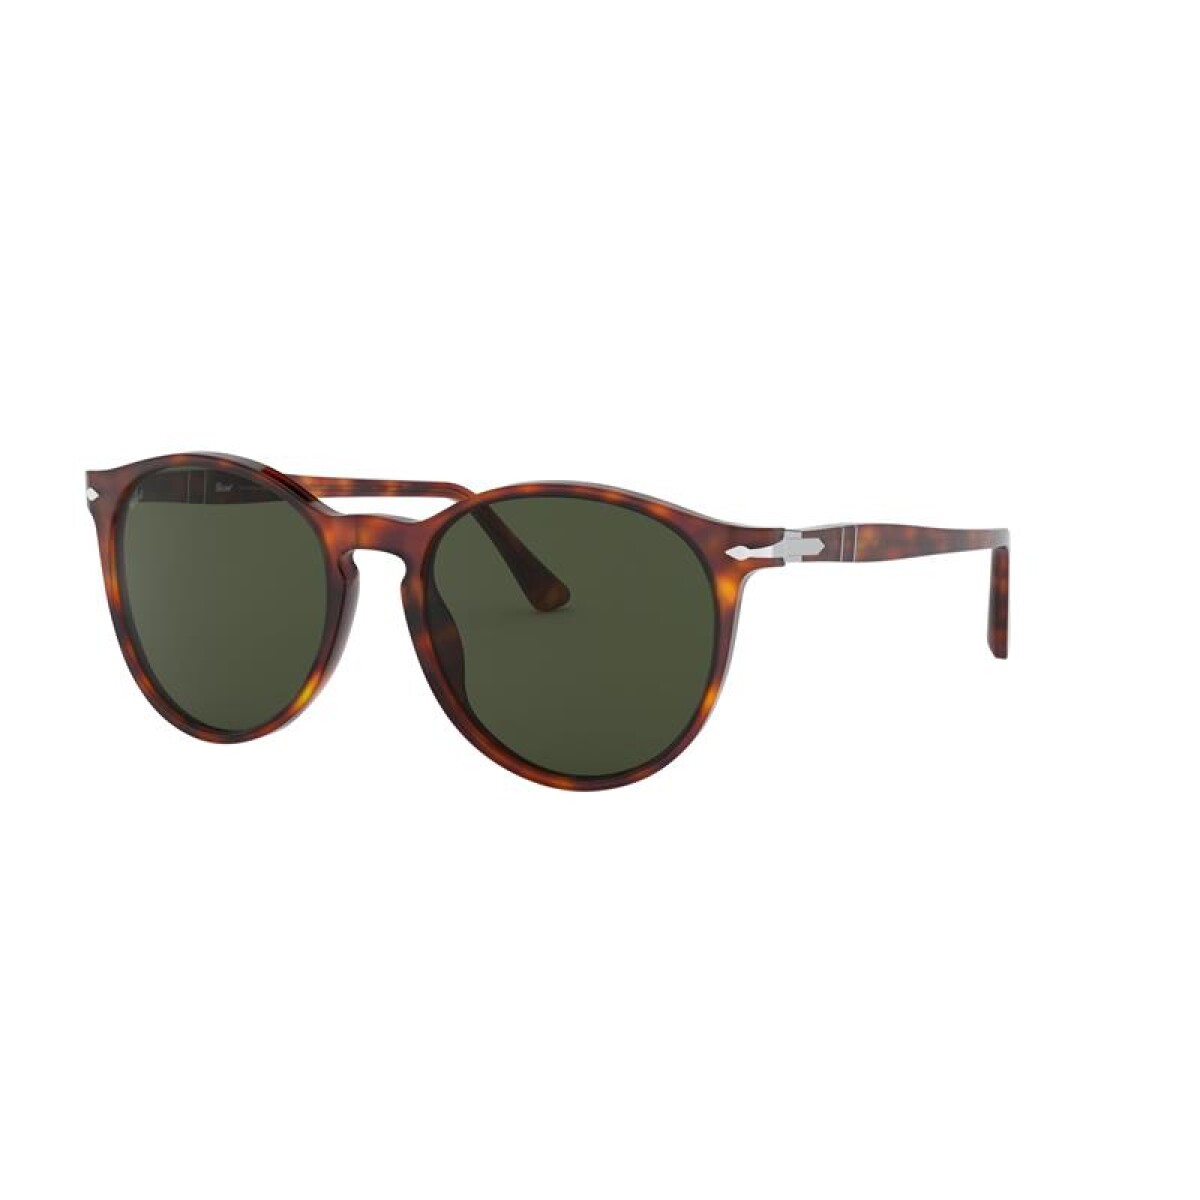 Persol 3228-s - 24/31 